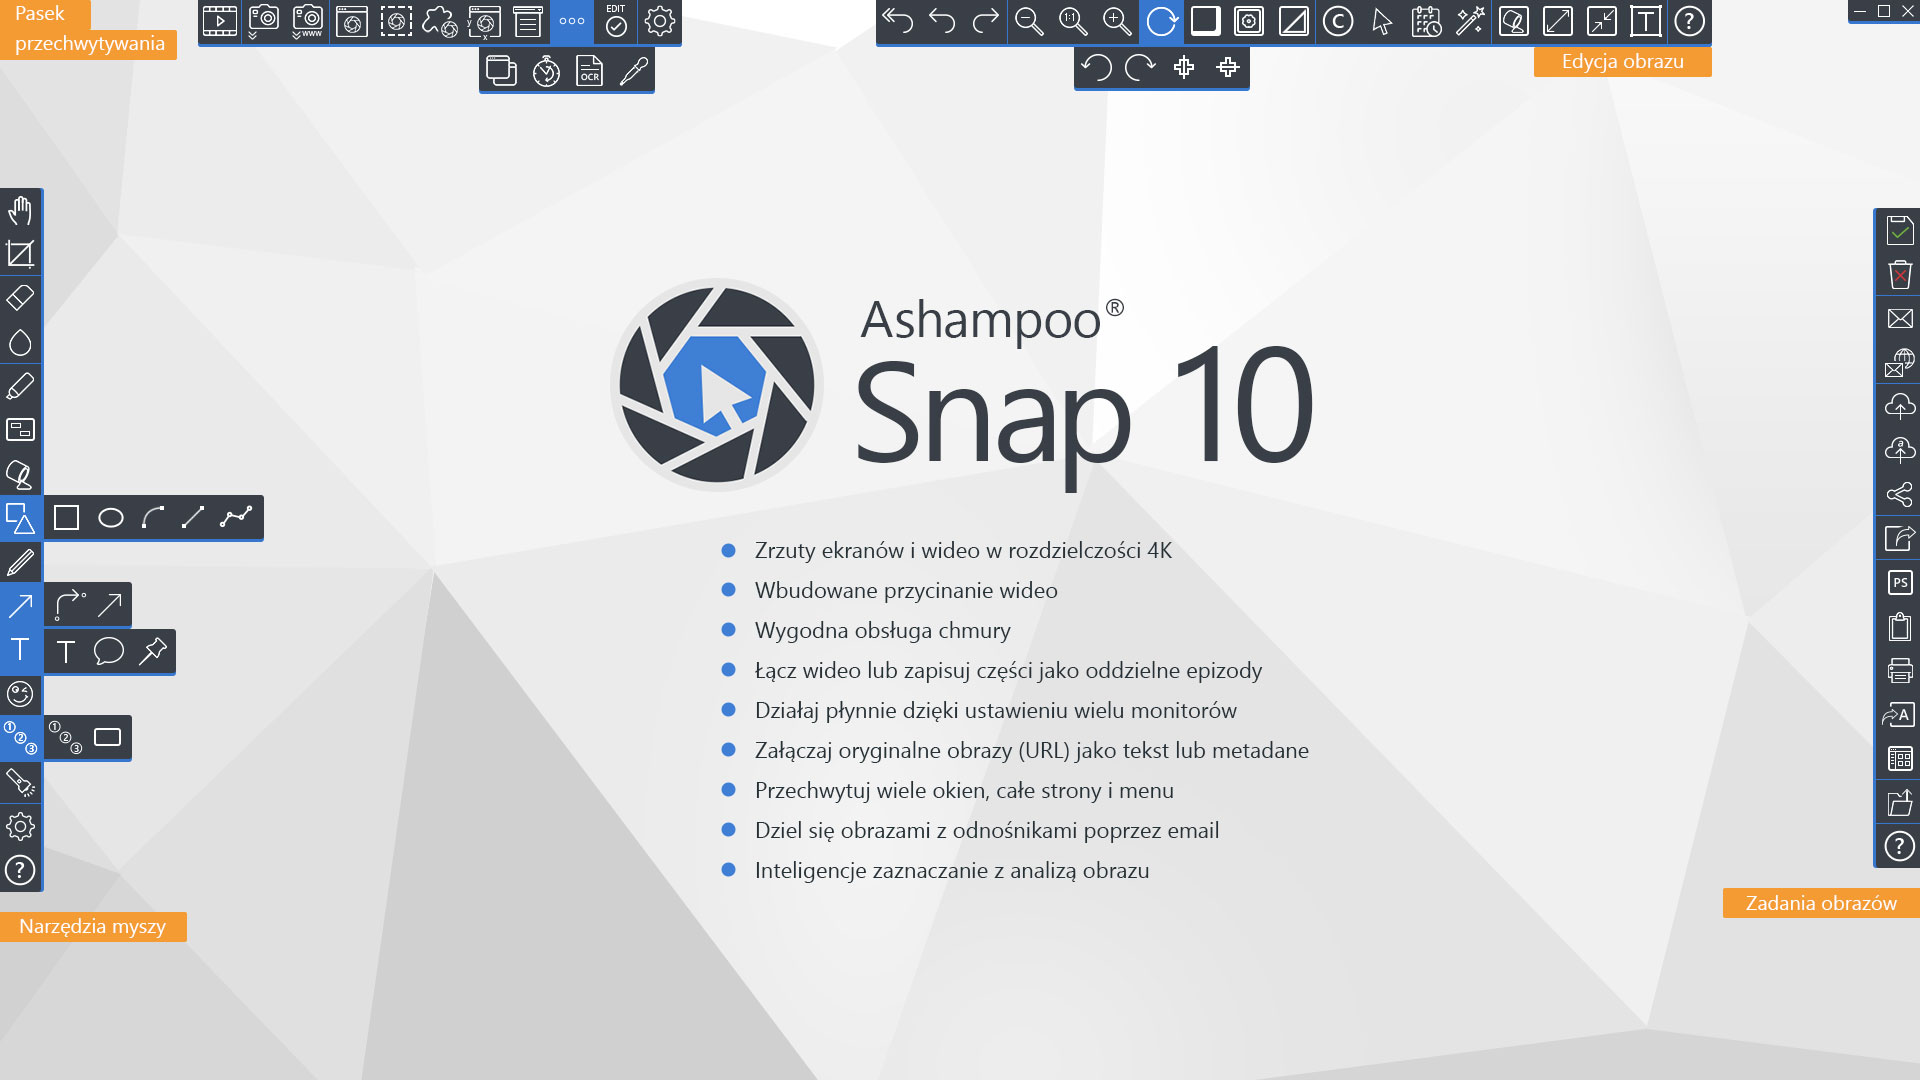 scr_ashampoo_snap_10_overview_functions_pl.jpg